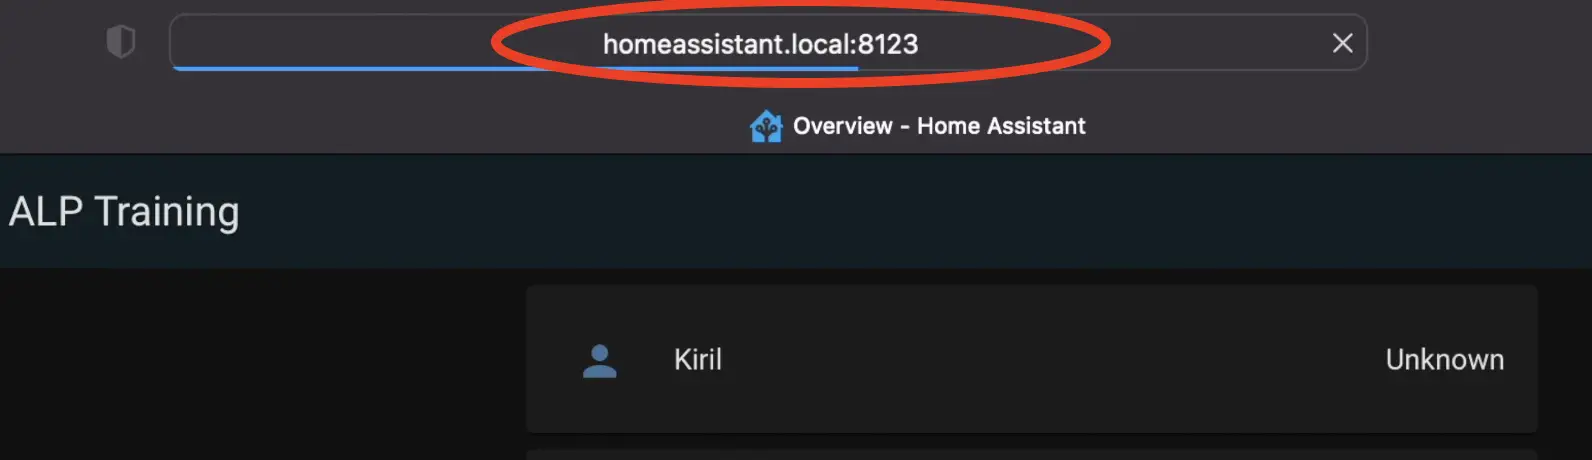 Home Assistant local URL address